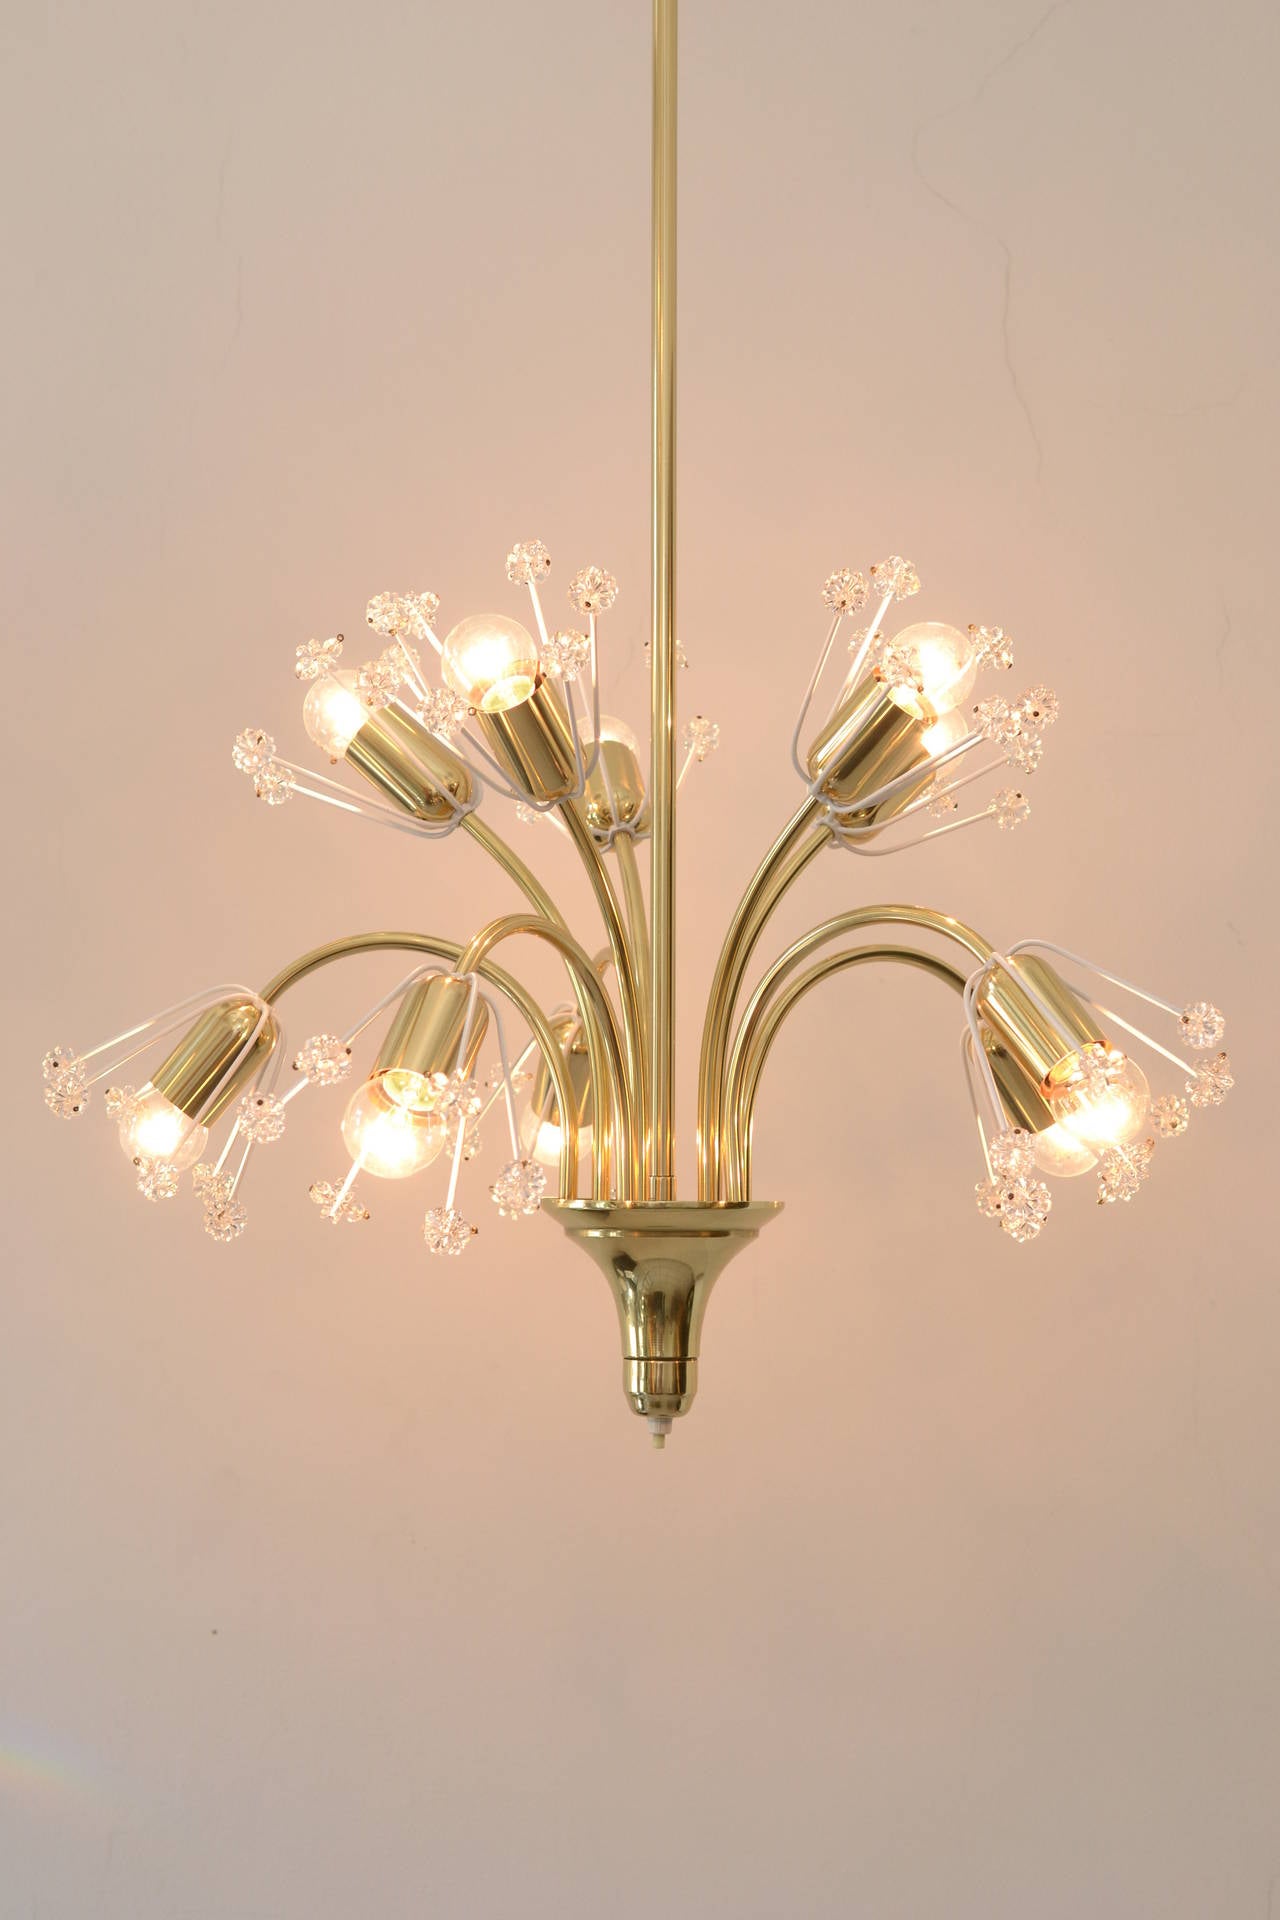 Three Floral Brass and Glass Sputnik Chandelier Pendant by Emil Stejnar, 1950s
polished and stove enamelled
There are 10 sockets for E27 bulbs.
lower light bulbs separately switchable
The height can be ordered
priced and sold per piece.

